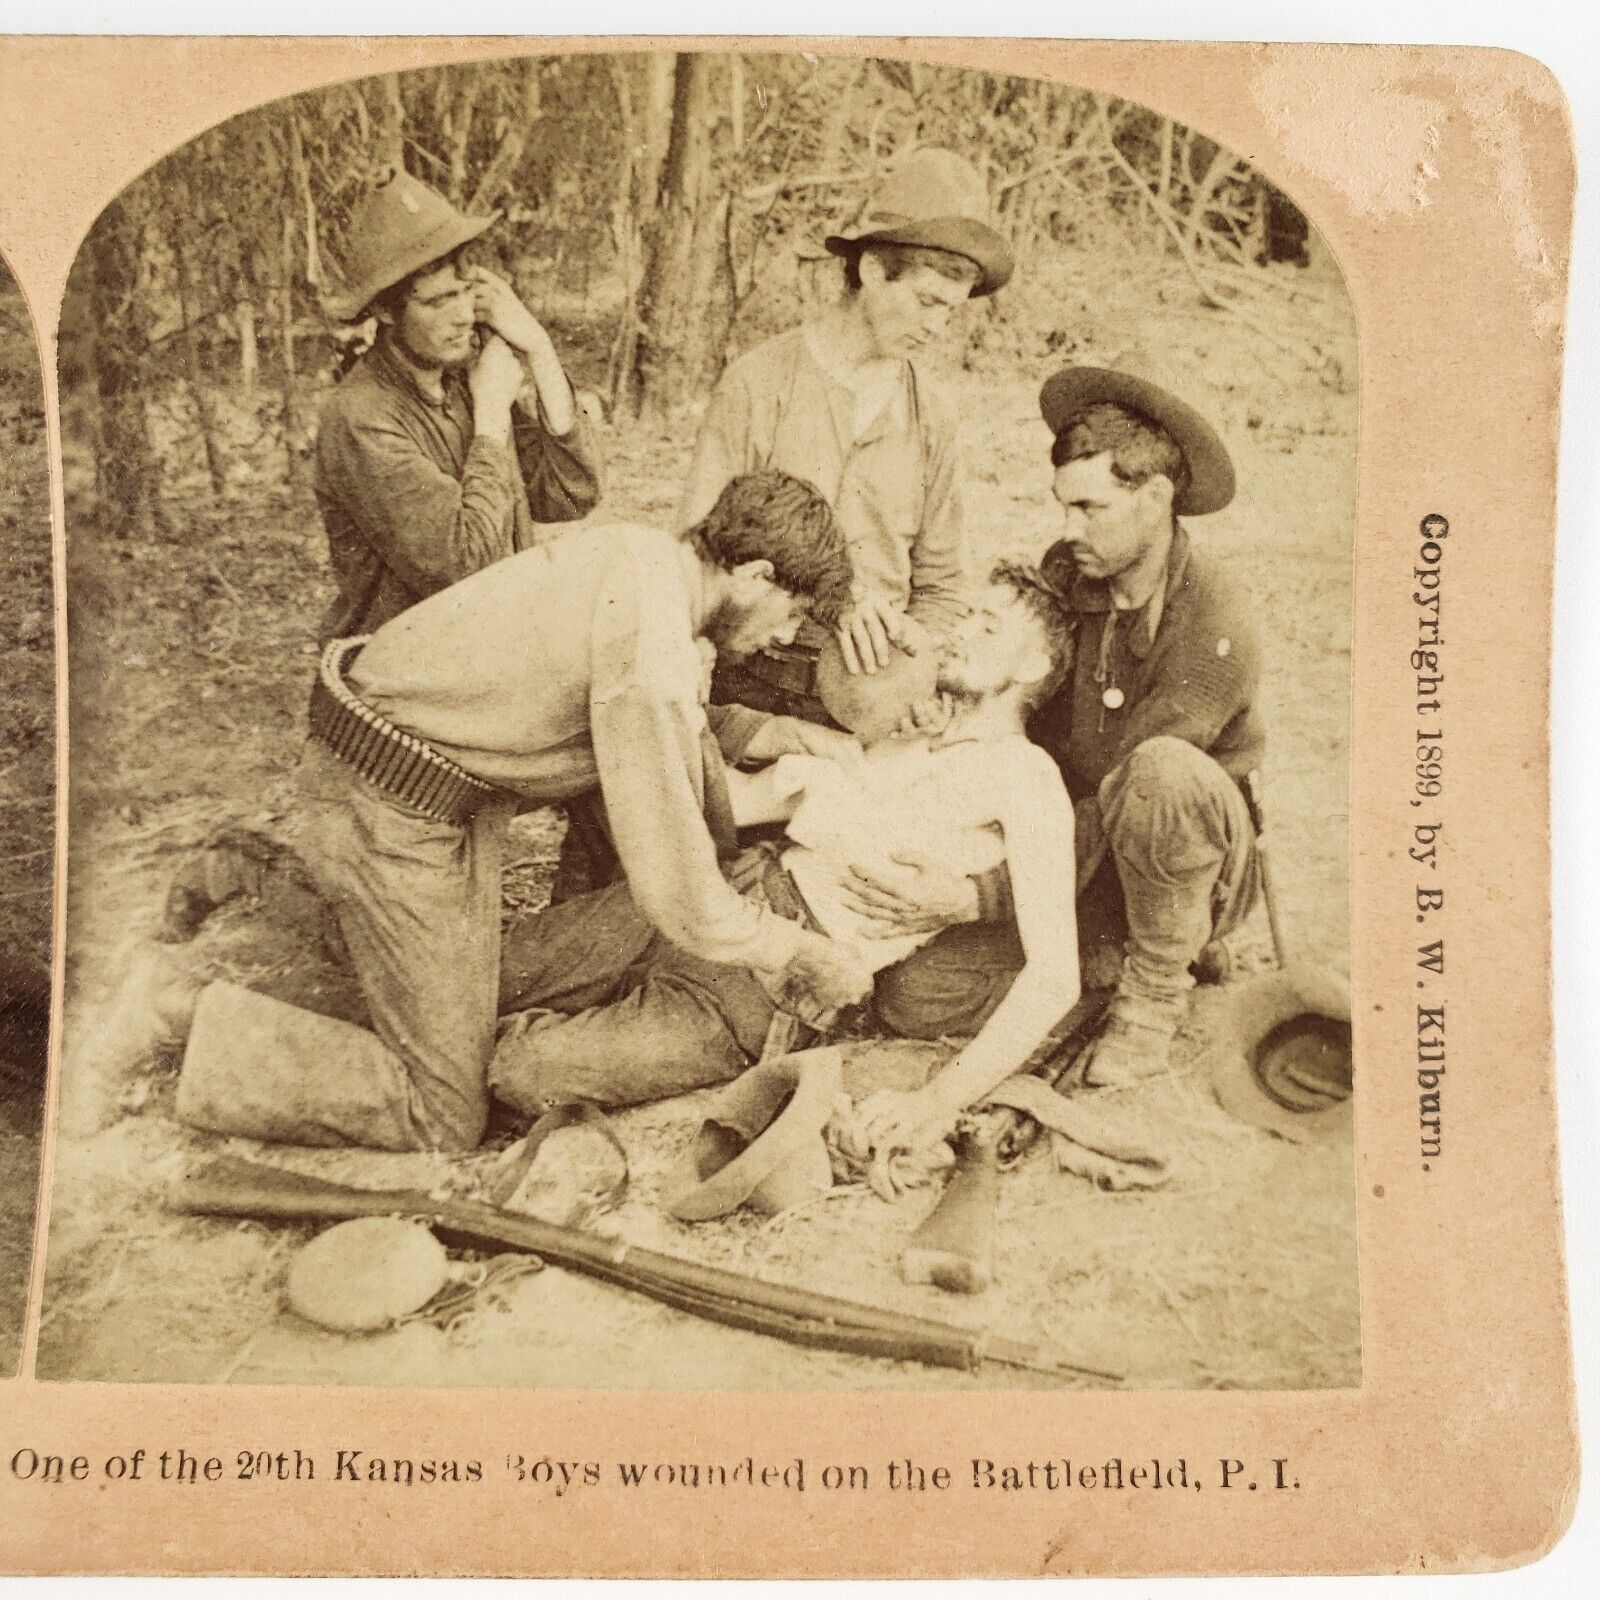 Wounded 20th Kansas Soldier Stereoview c1899 Philippine American War Photo B2139